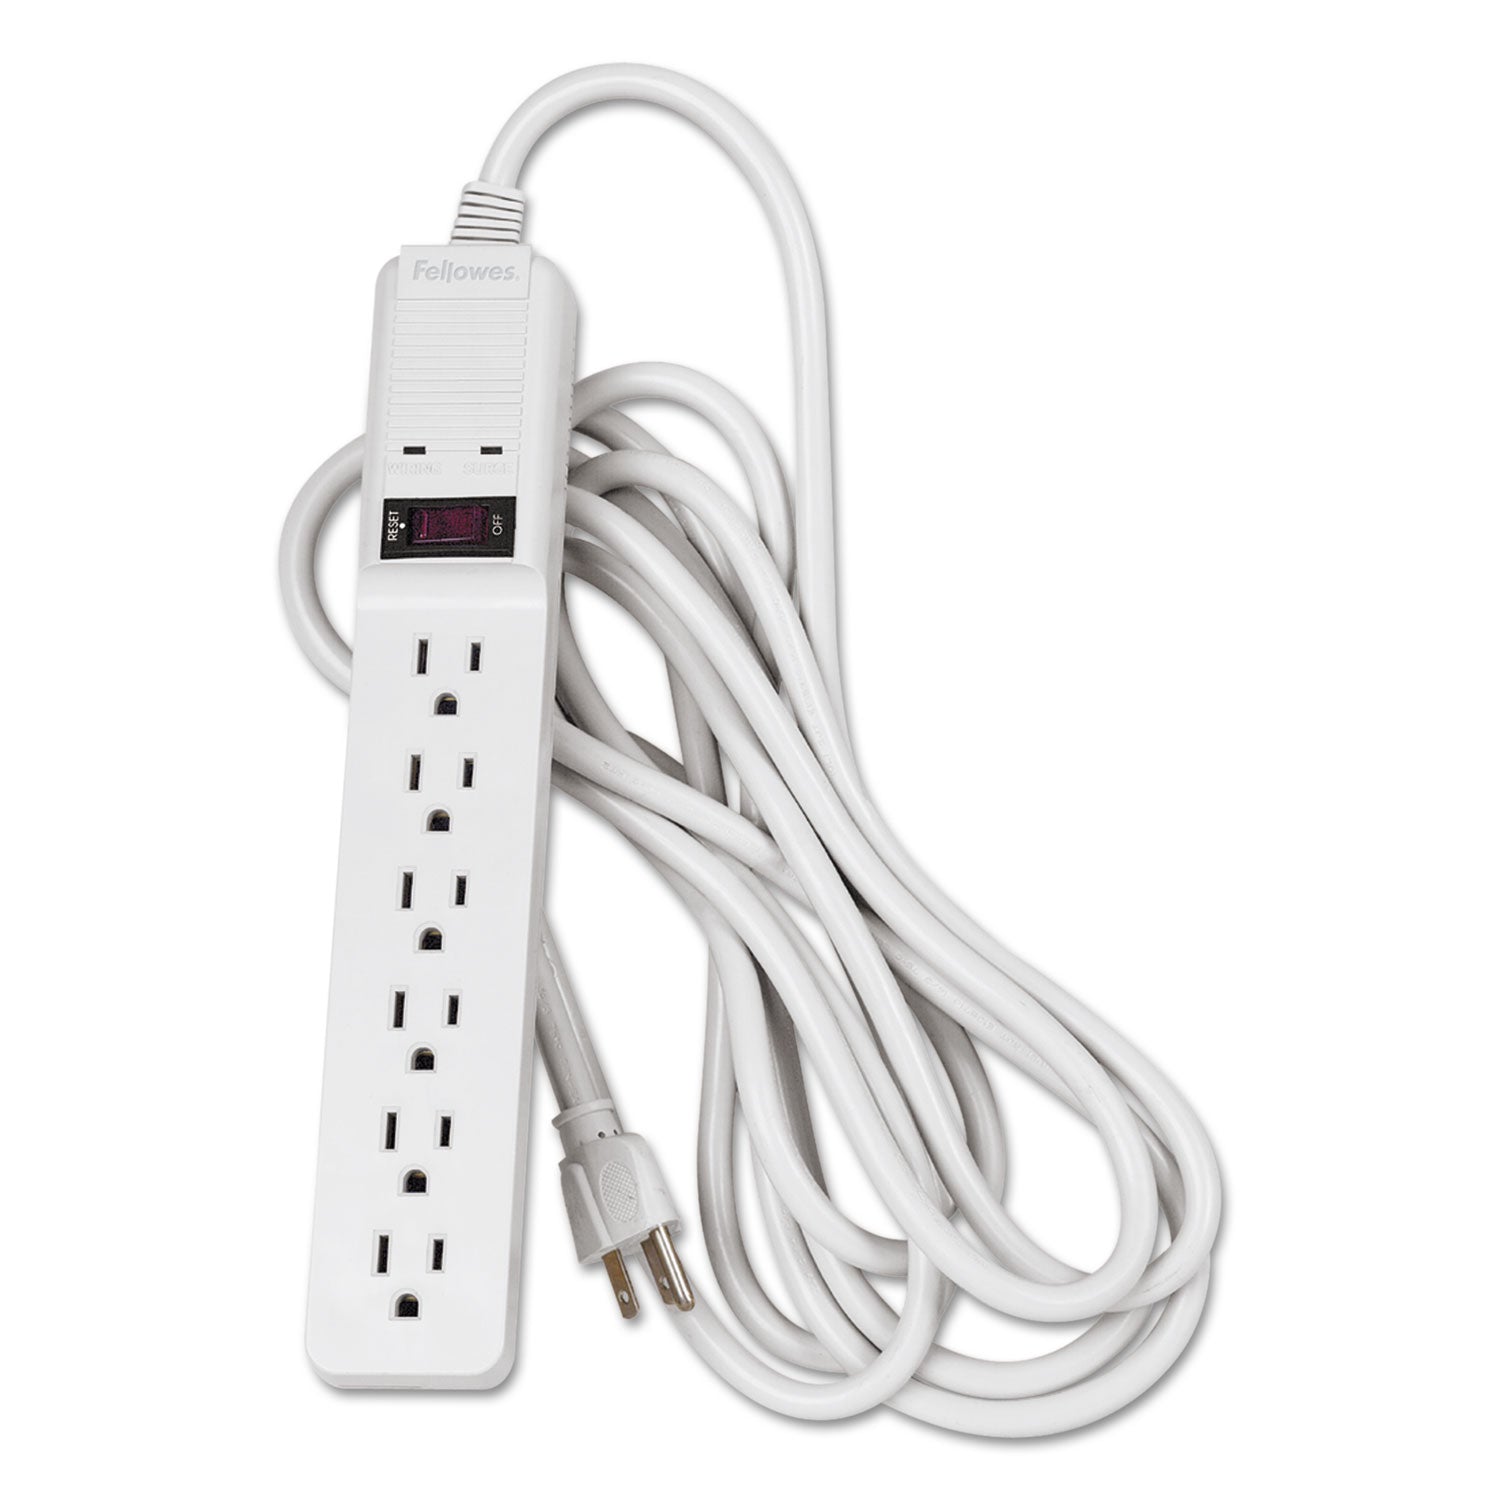 Basic Home/Office Surge Protector, 6 AC Outlets, 15 ft Cord, 450 J, Platinum - 